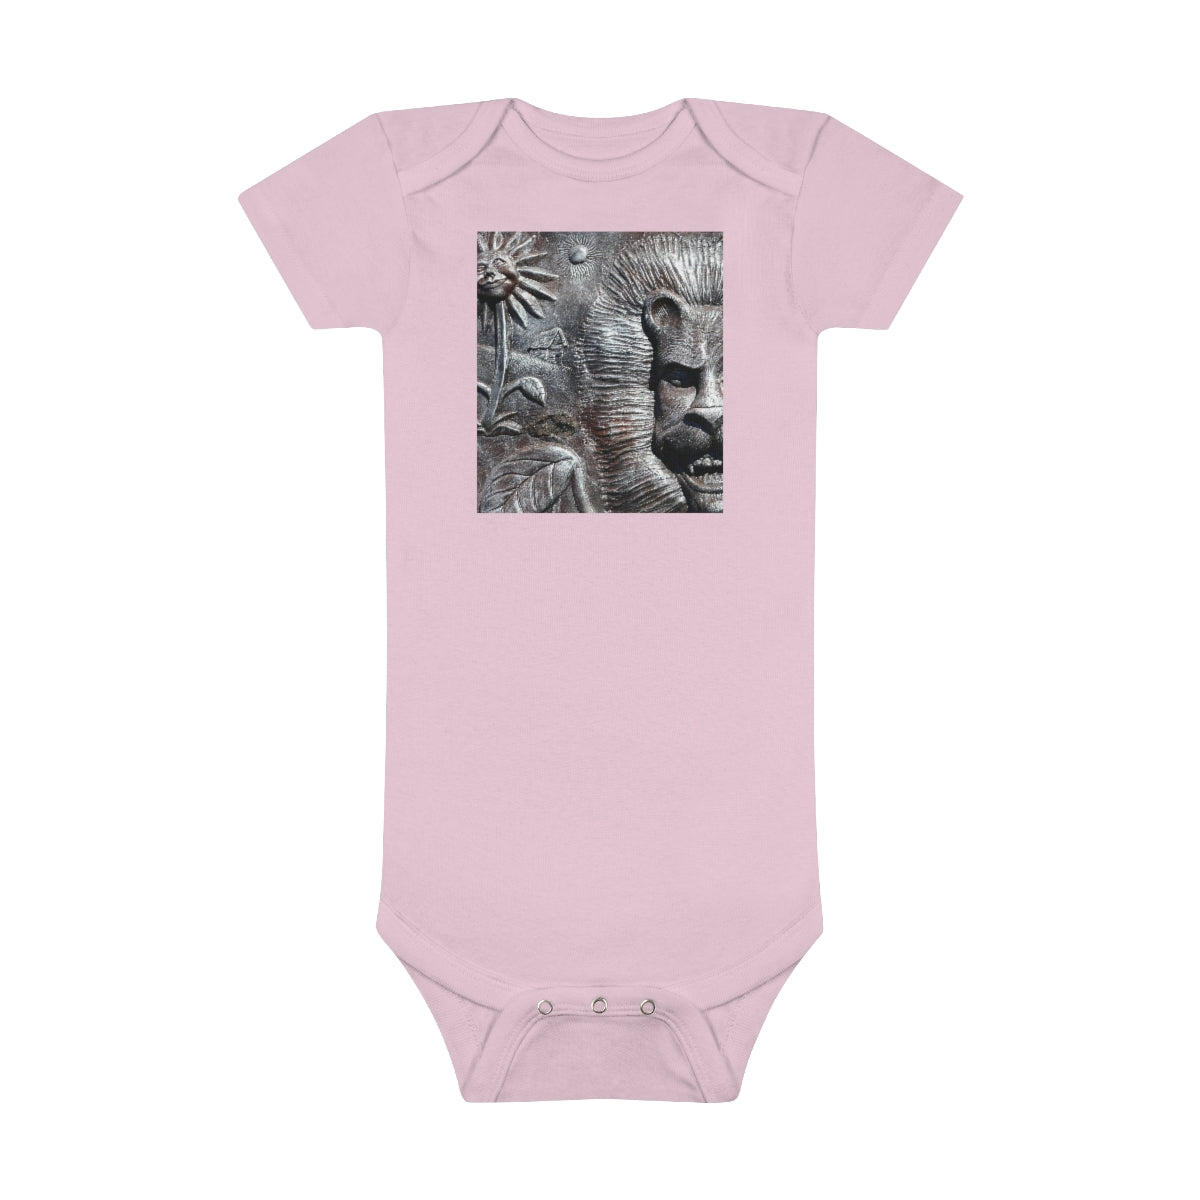 Lion's Friends Forever V2 - Baby Short Sleeve Onesie - Fry1Productions